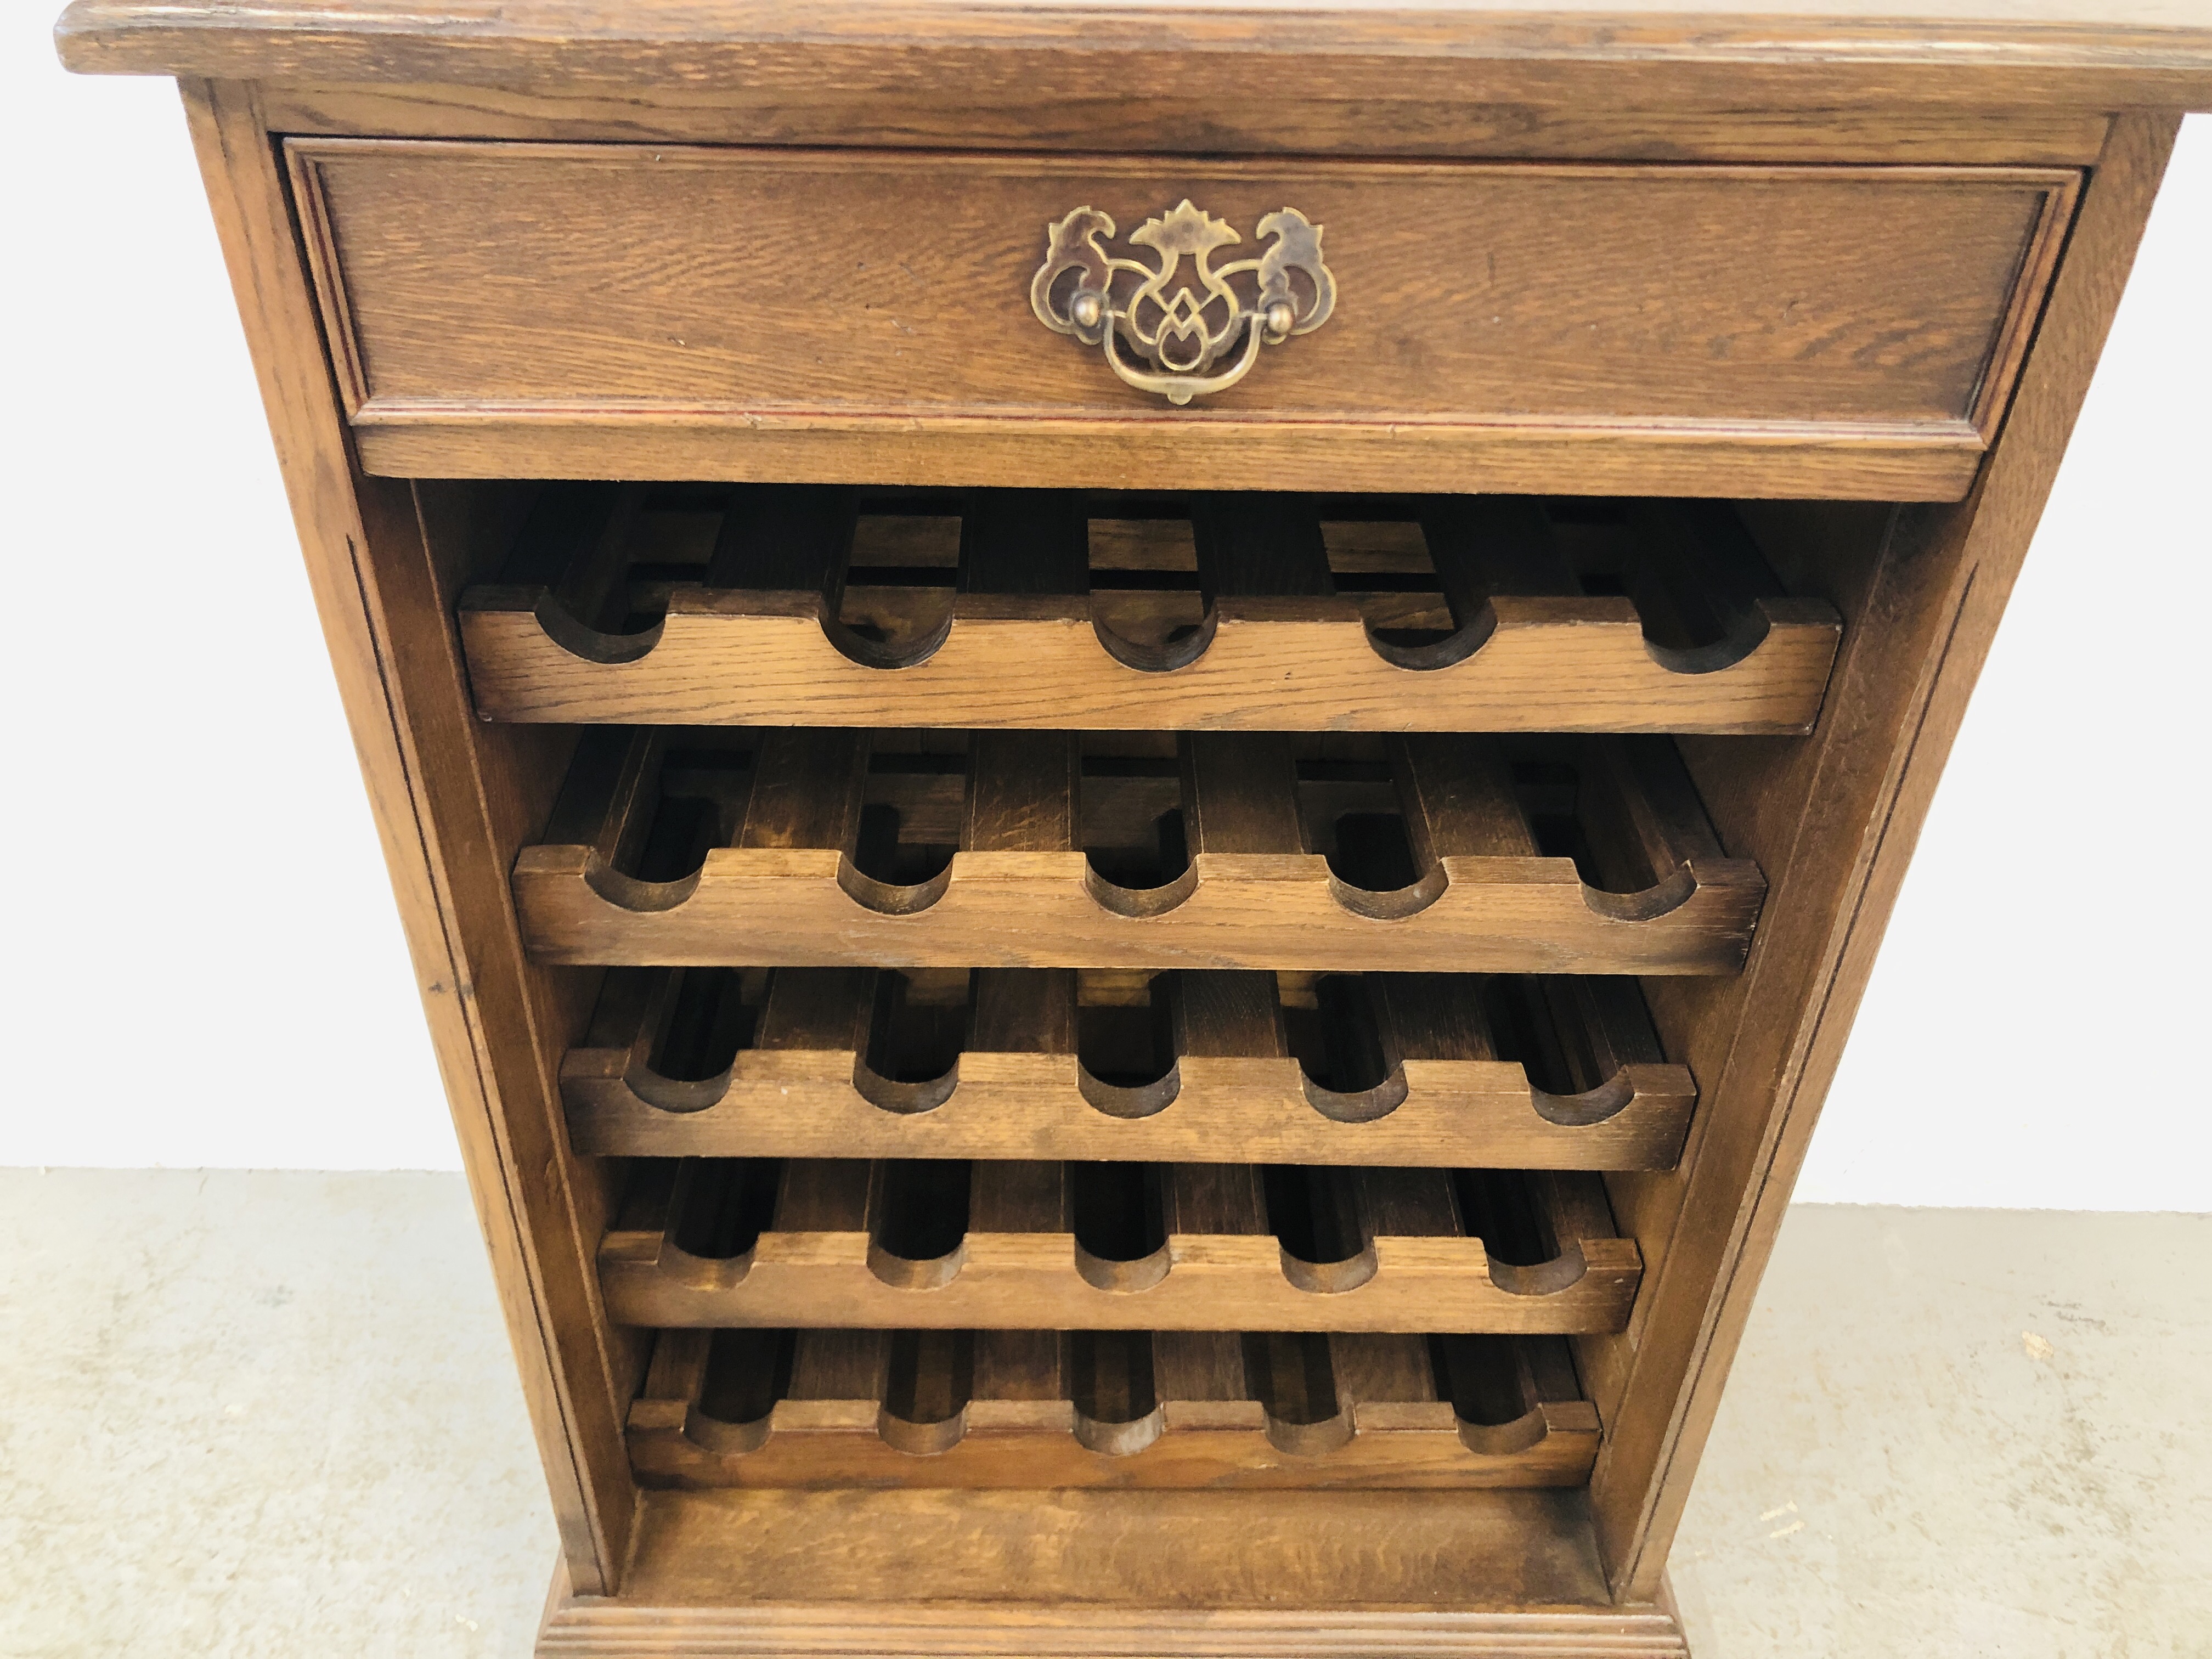 A GOOD QUALITY SOLID OAK WINE CELLAR, - Image 2 of 9